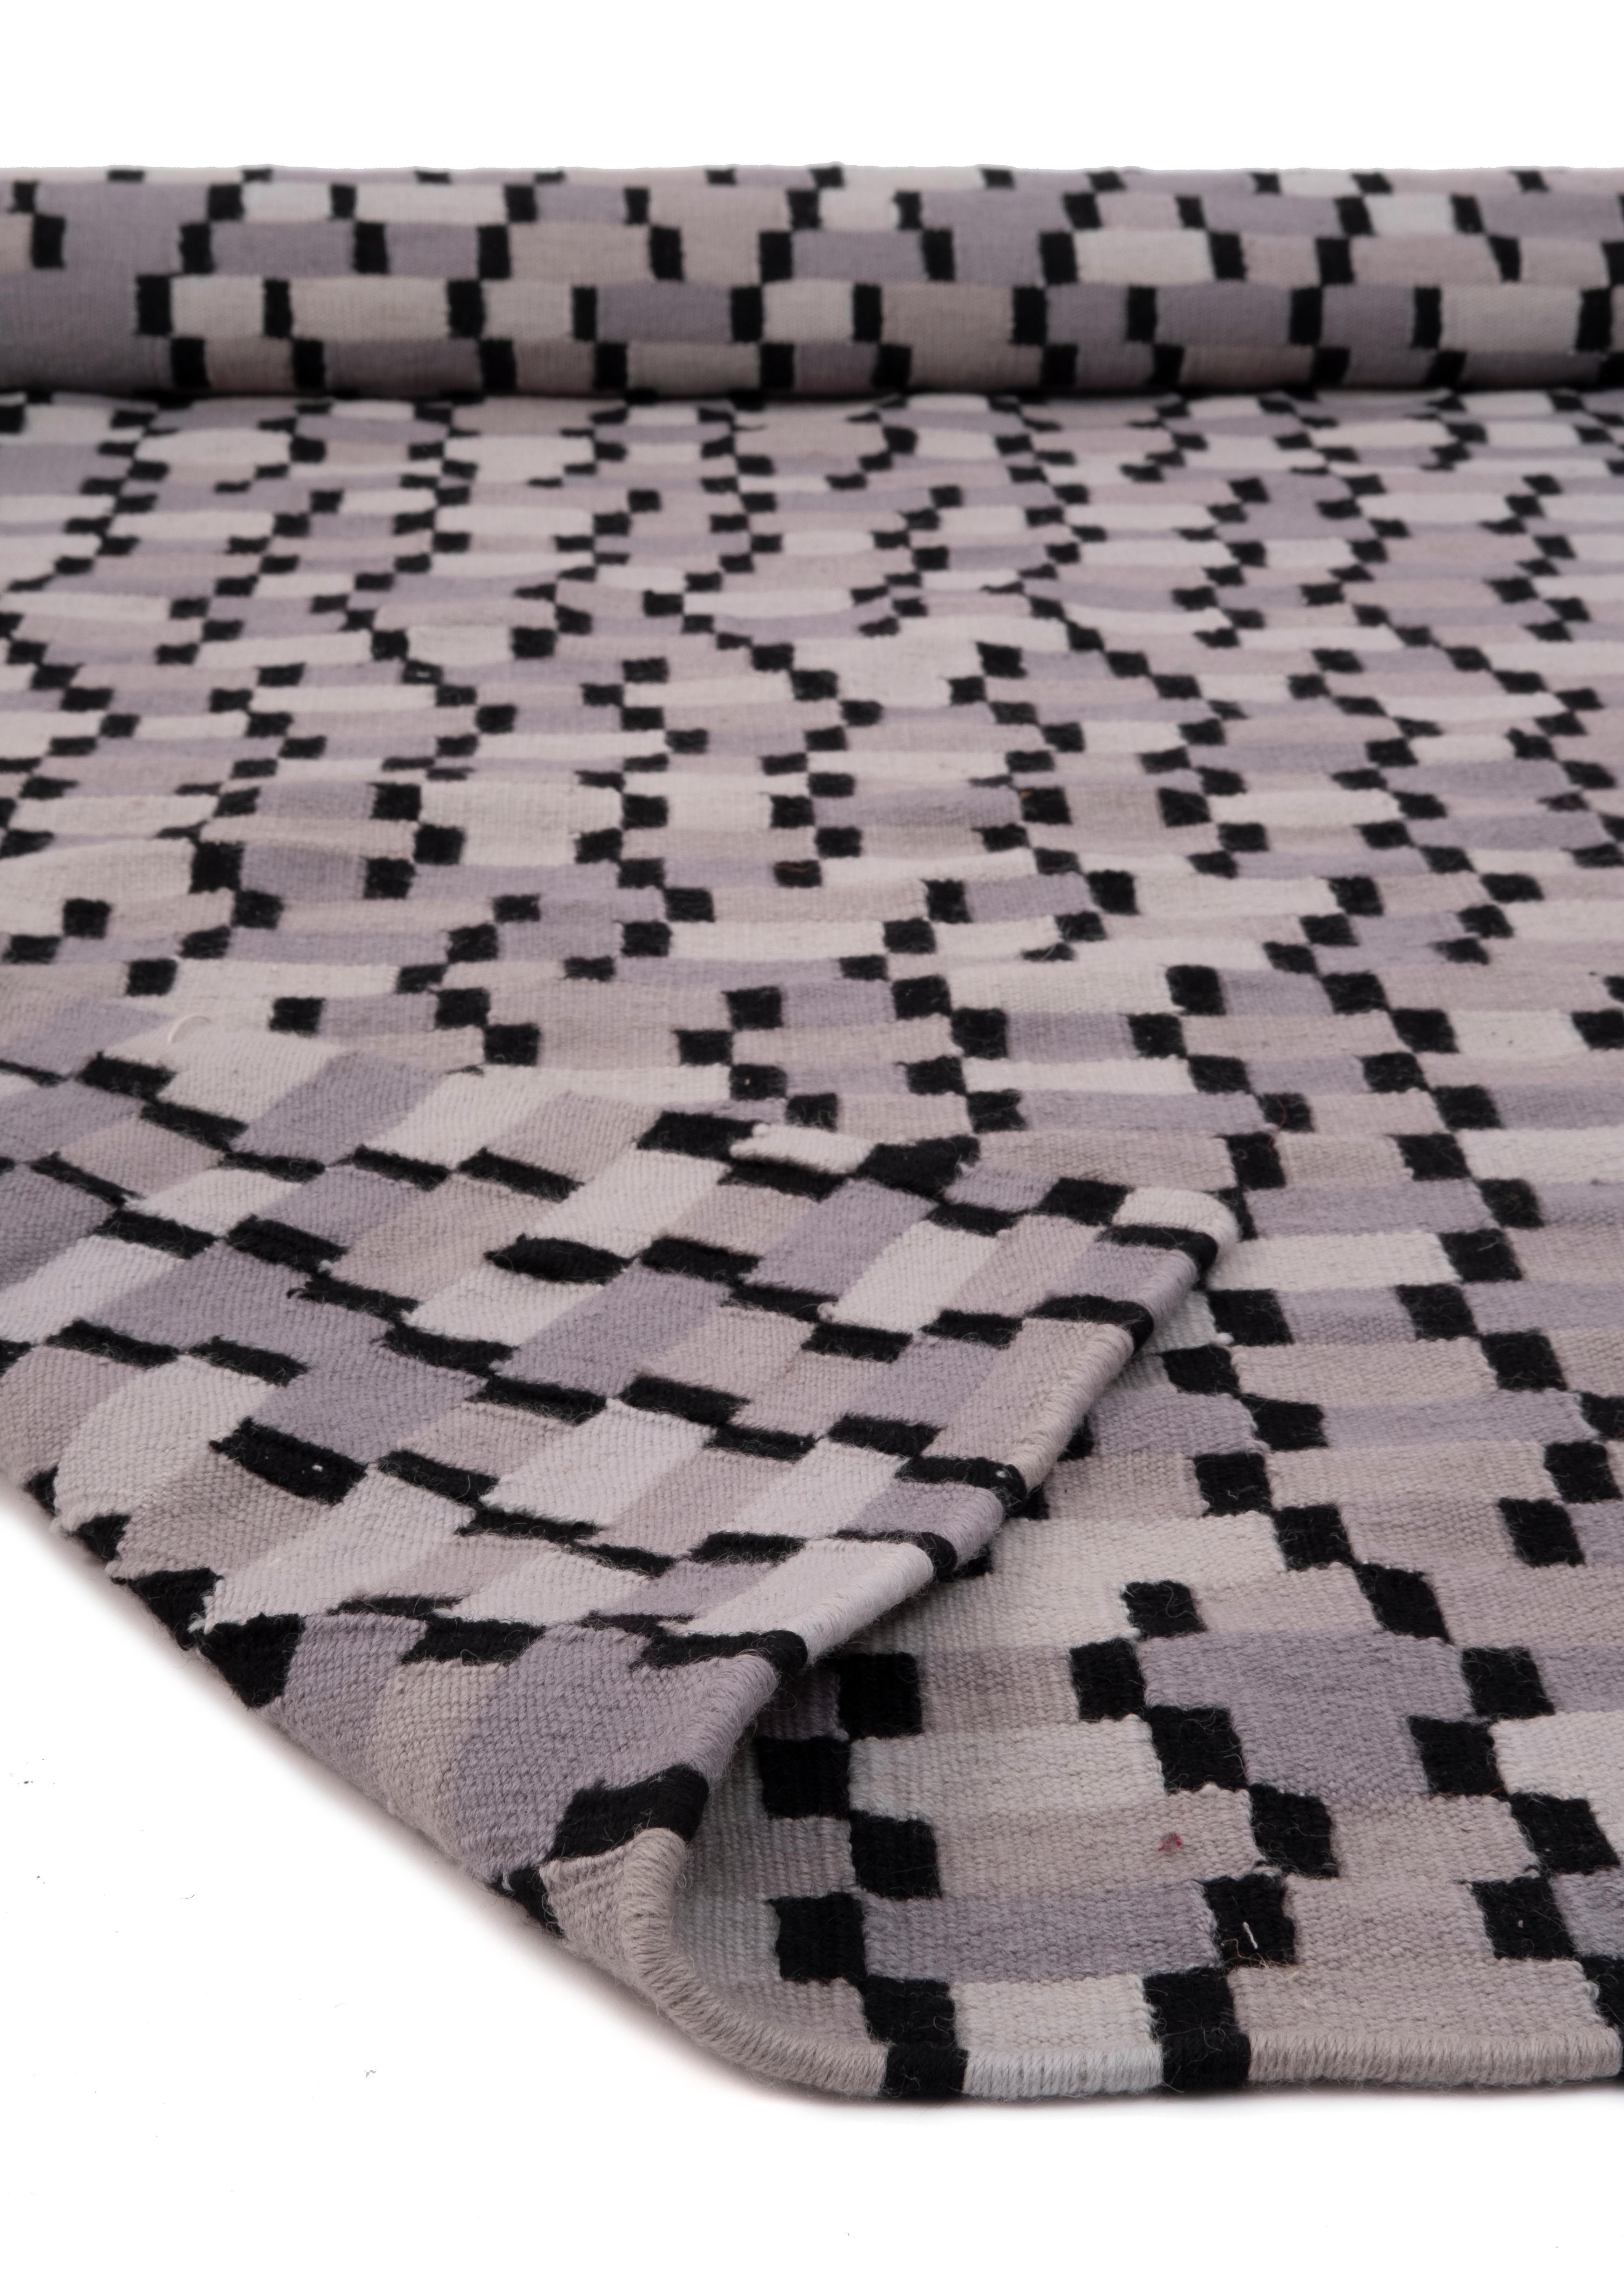 Hand-Woven Tempo Cinque - Grey - Design Summer Kilim Rug Wool Cotton Carpet Handwoven Flat For Sale